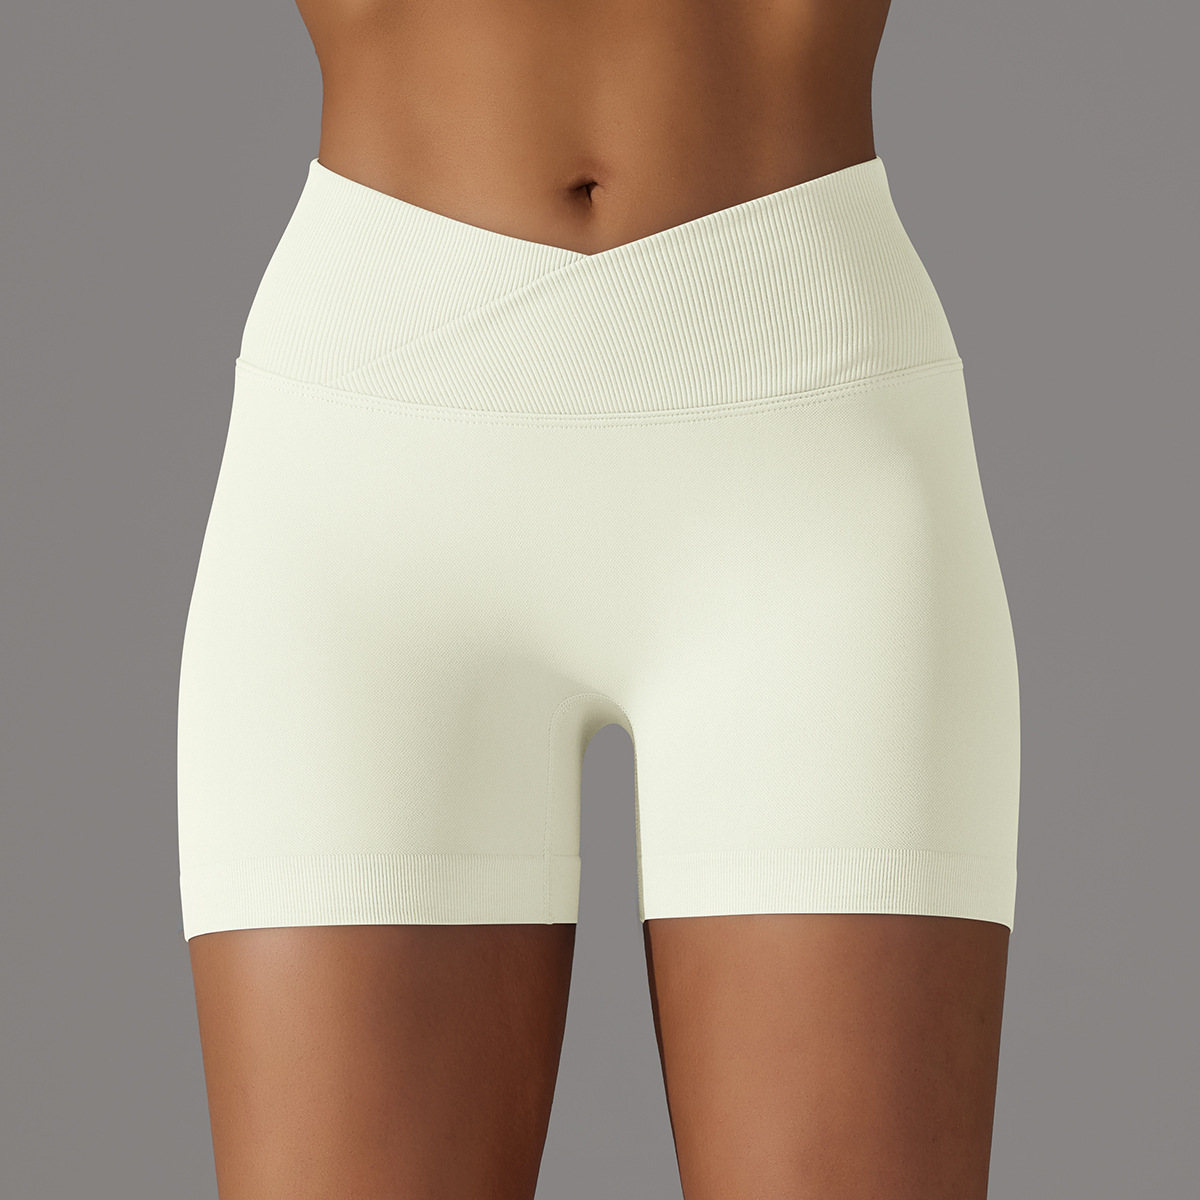 sports shorts manufacturers